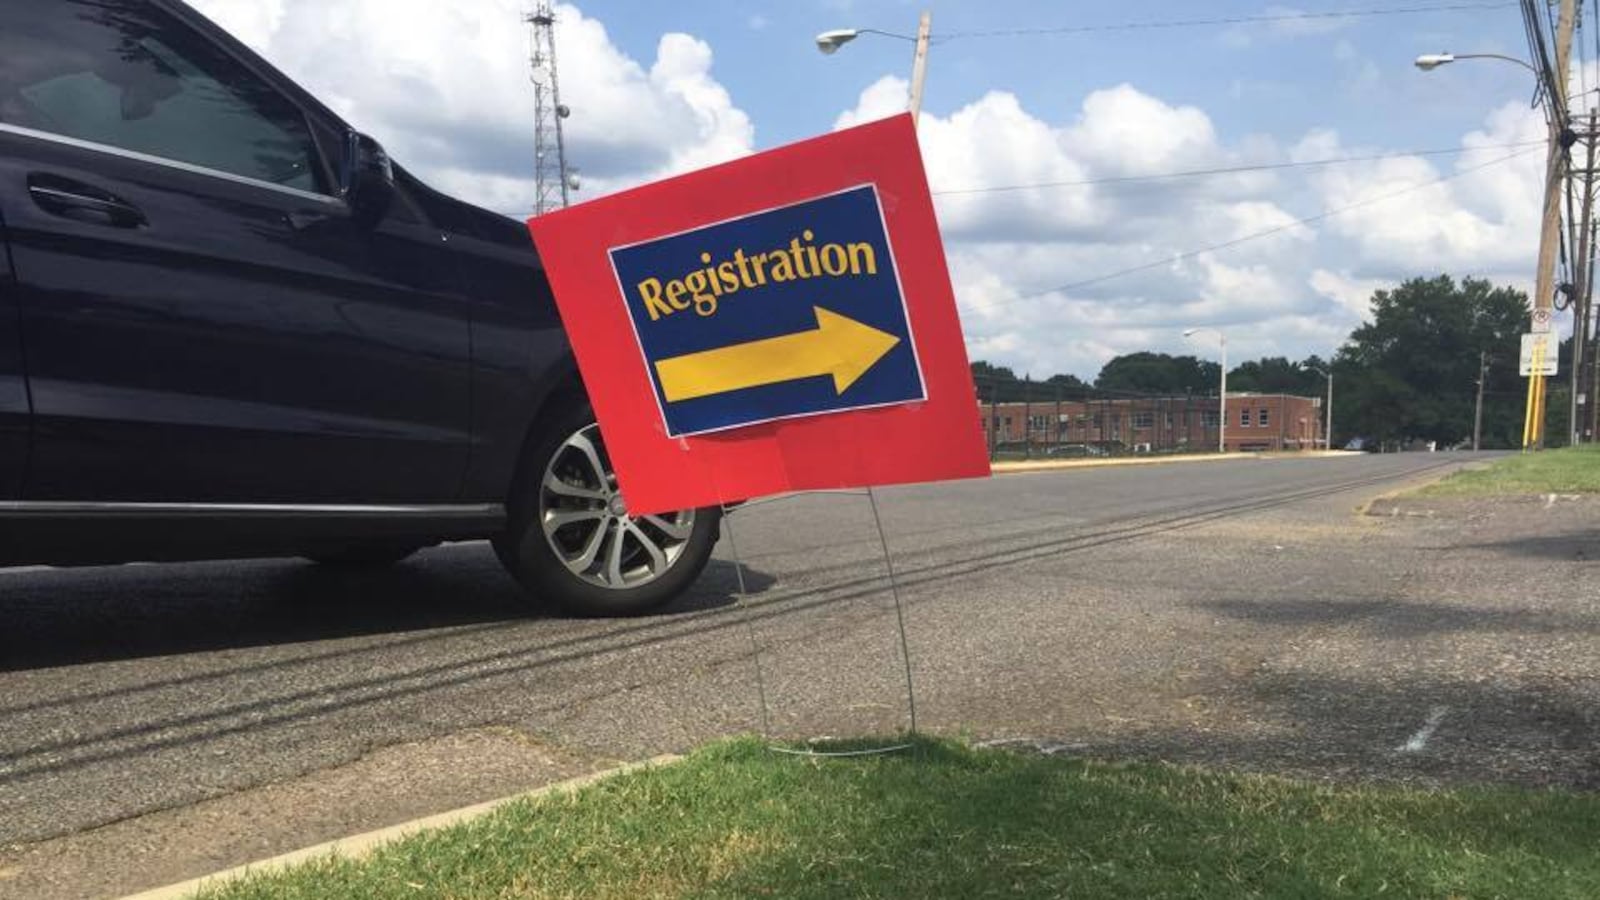 A sign points the way to a registration event inside the headquarters of Shelby County Schools.